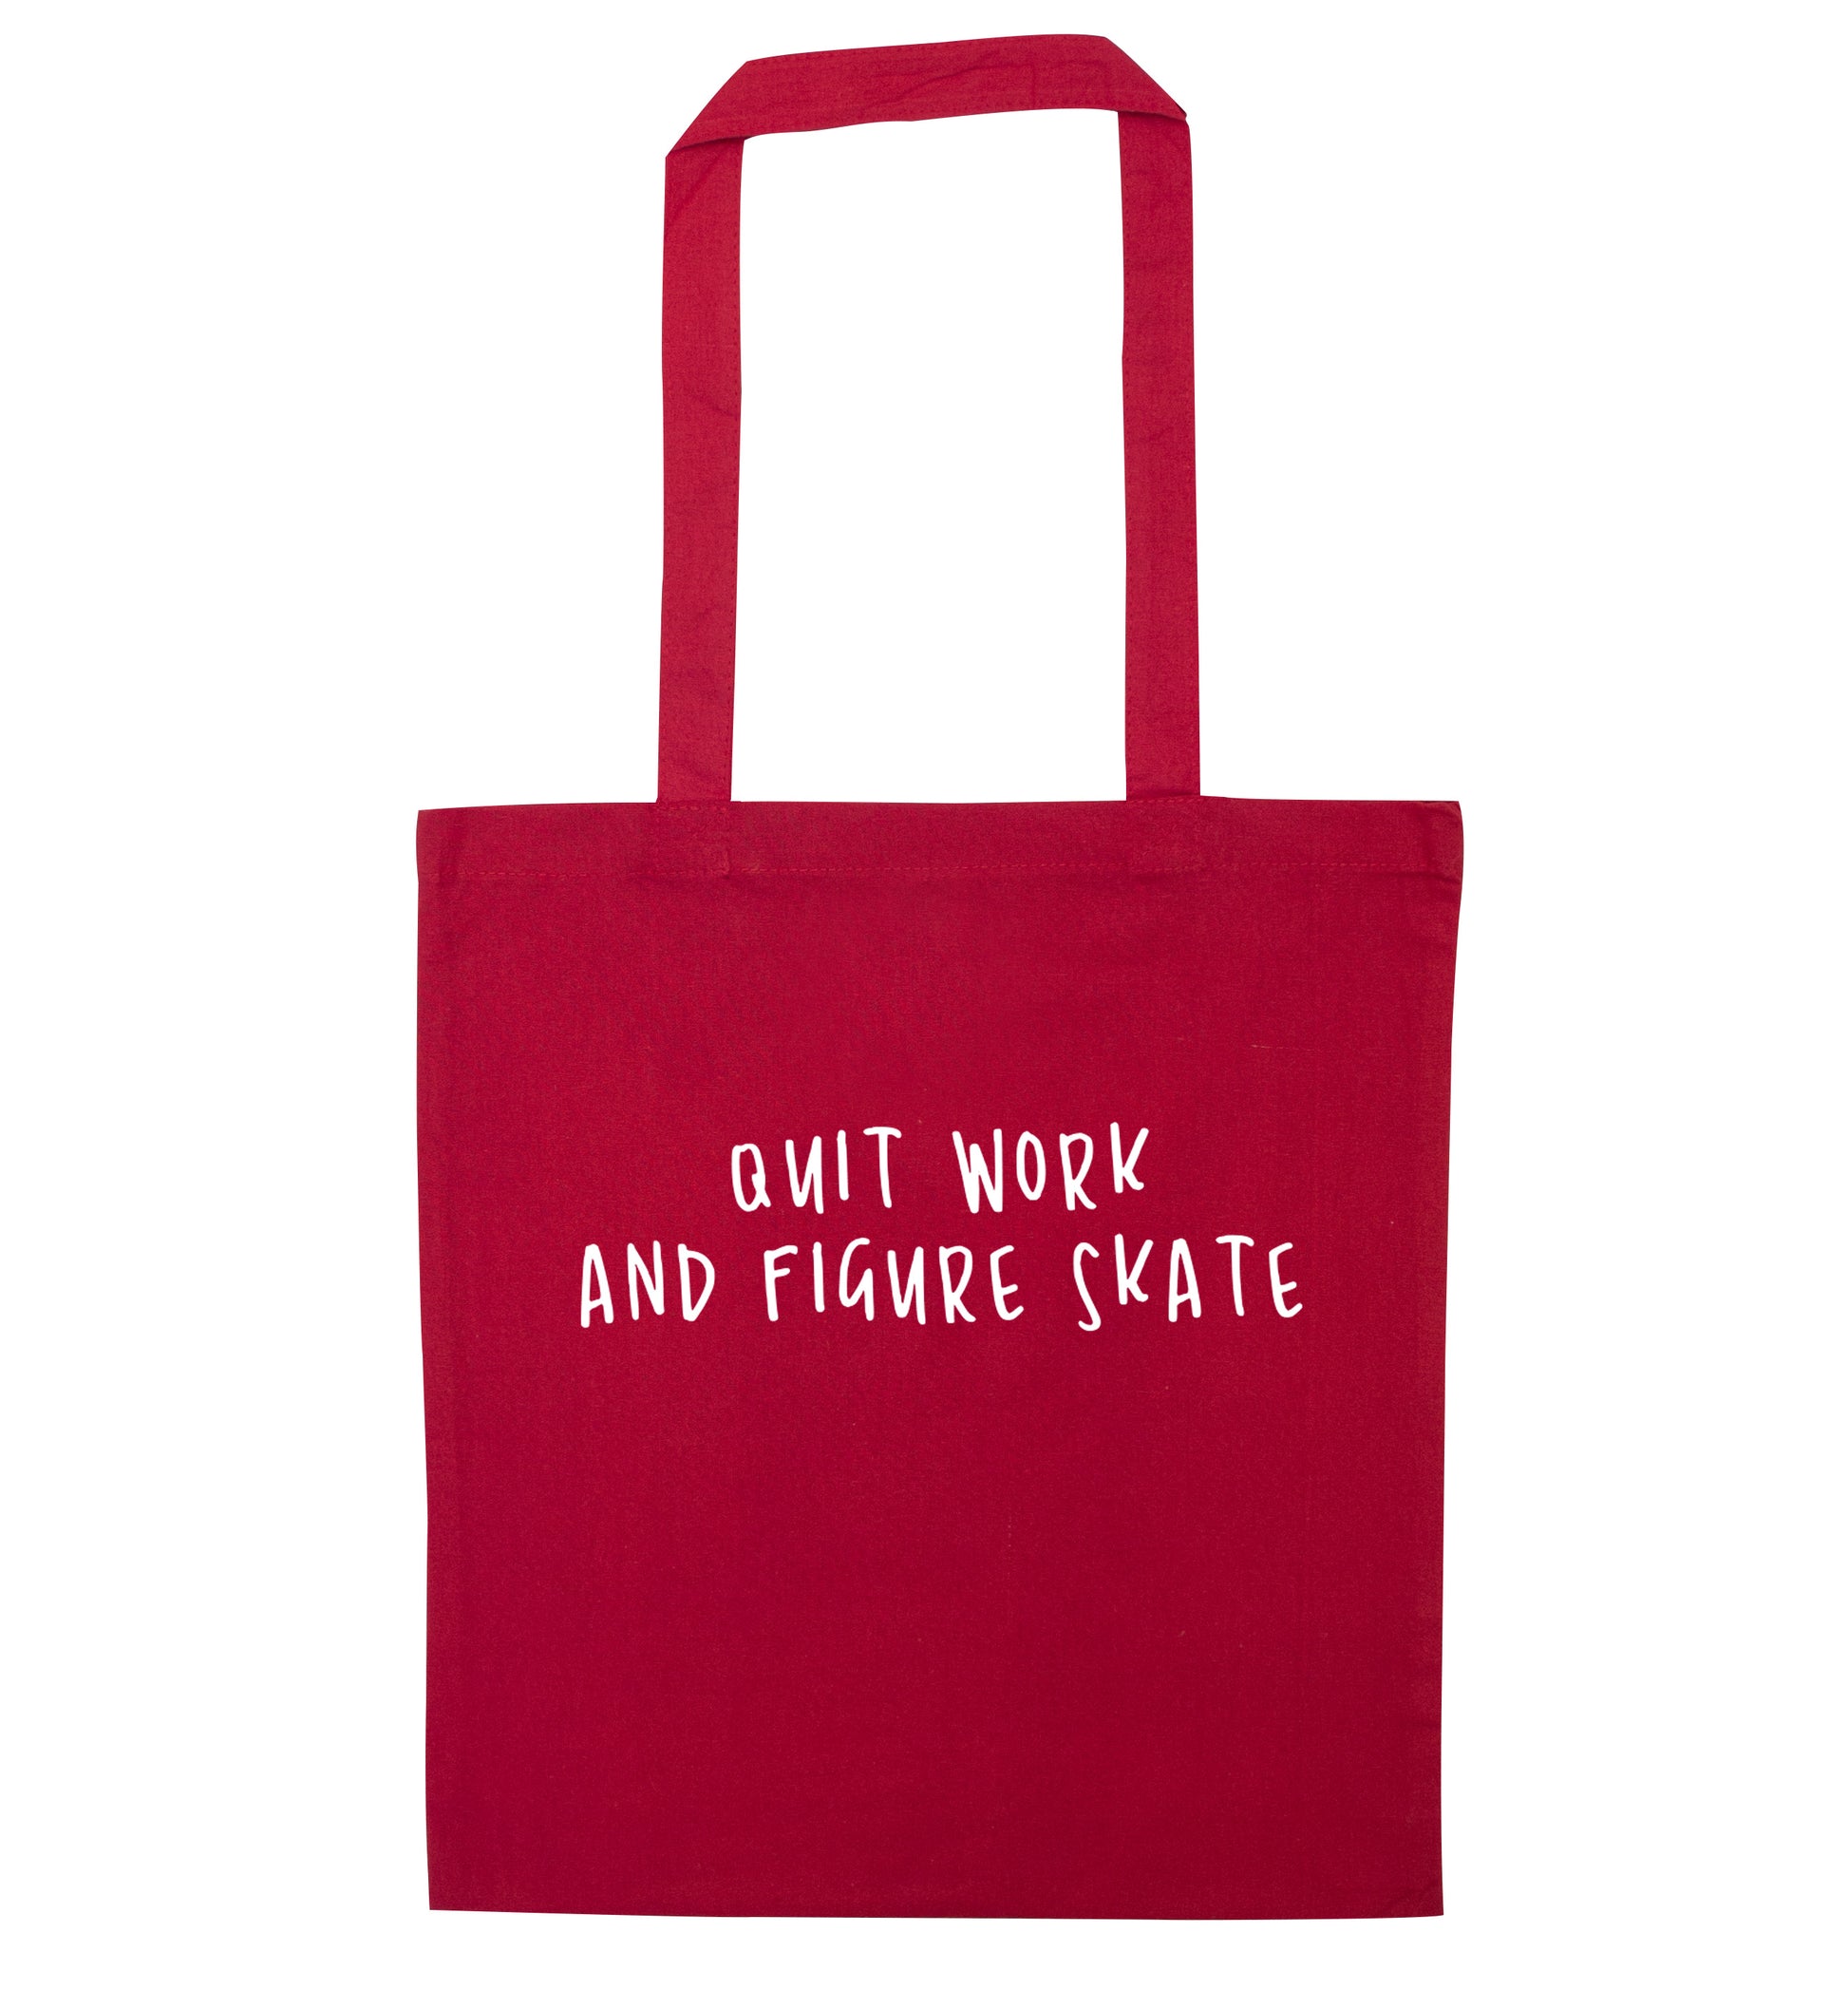 Quit work figure skate red tote bag